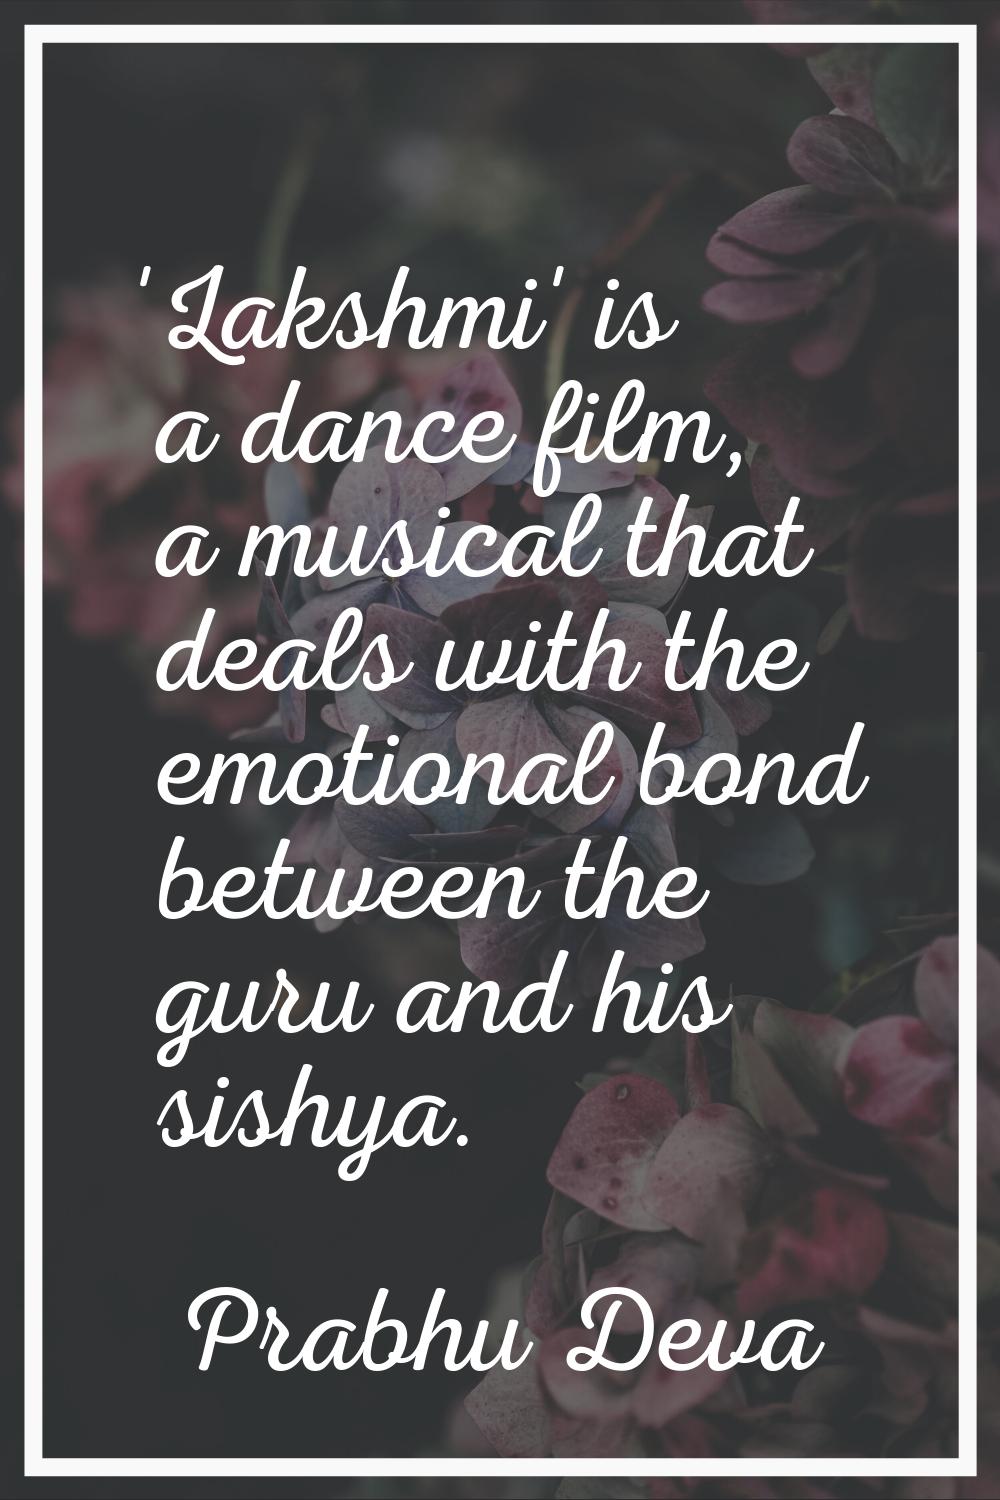 'Lakshmi' is a dance film, a musical that deals with the emotional bond between the guru and his si